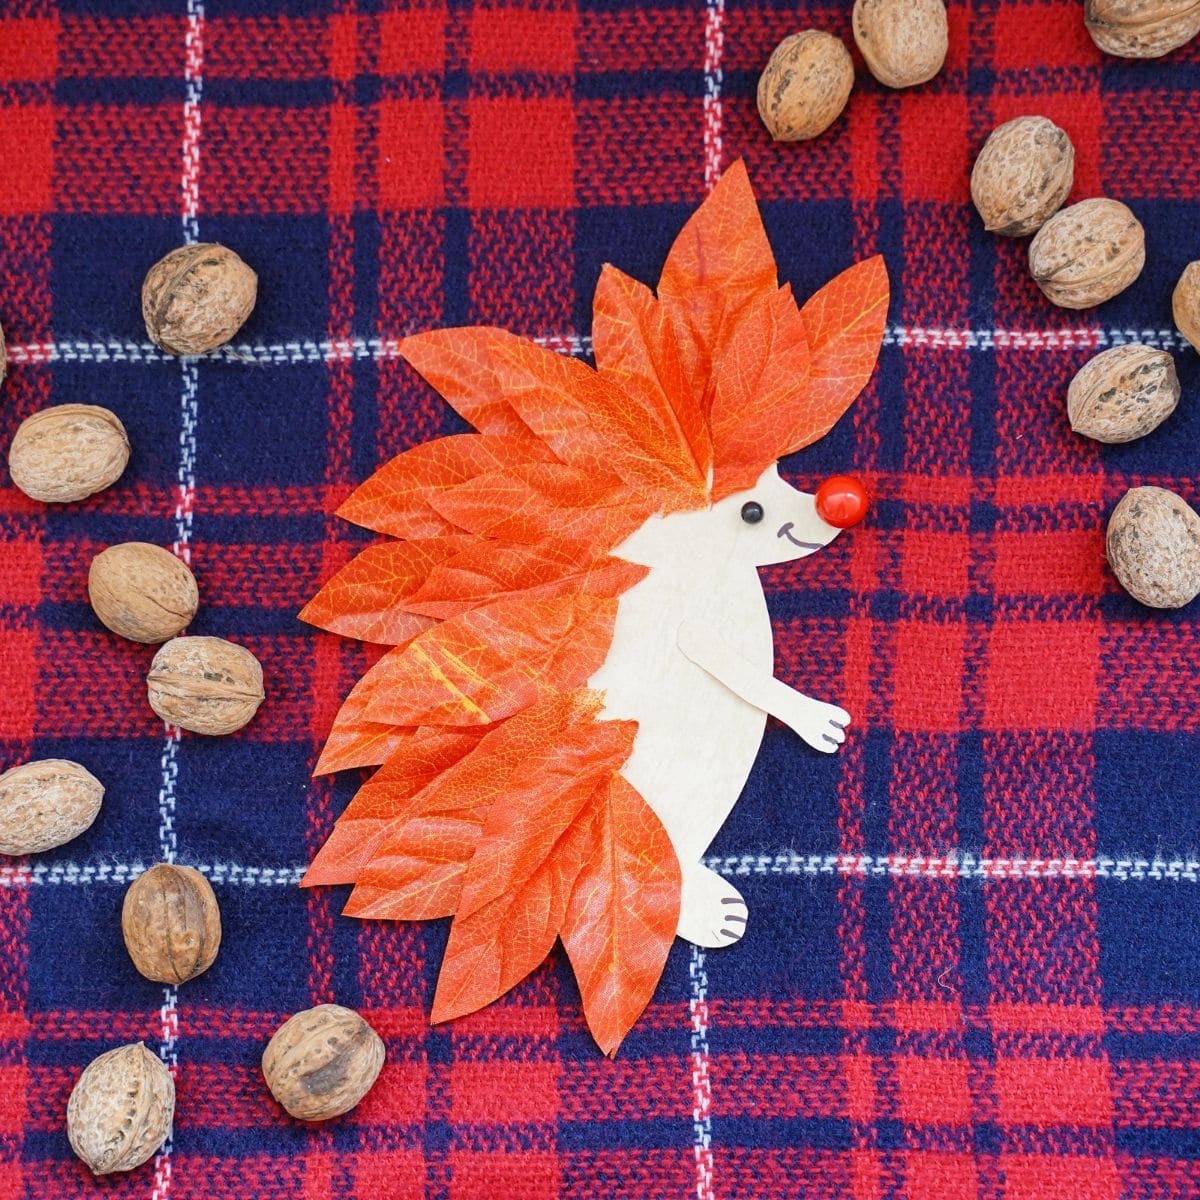 Red and blue plaid fabric with paper and leaf hedgehog on top next to pecans